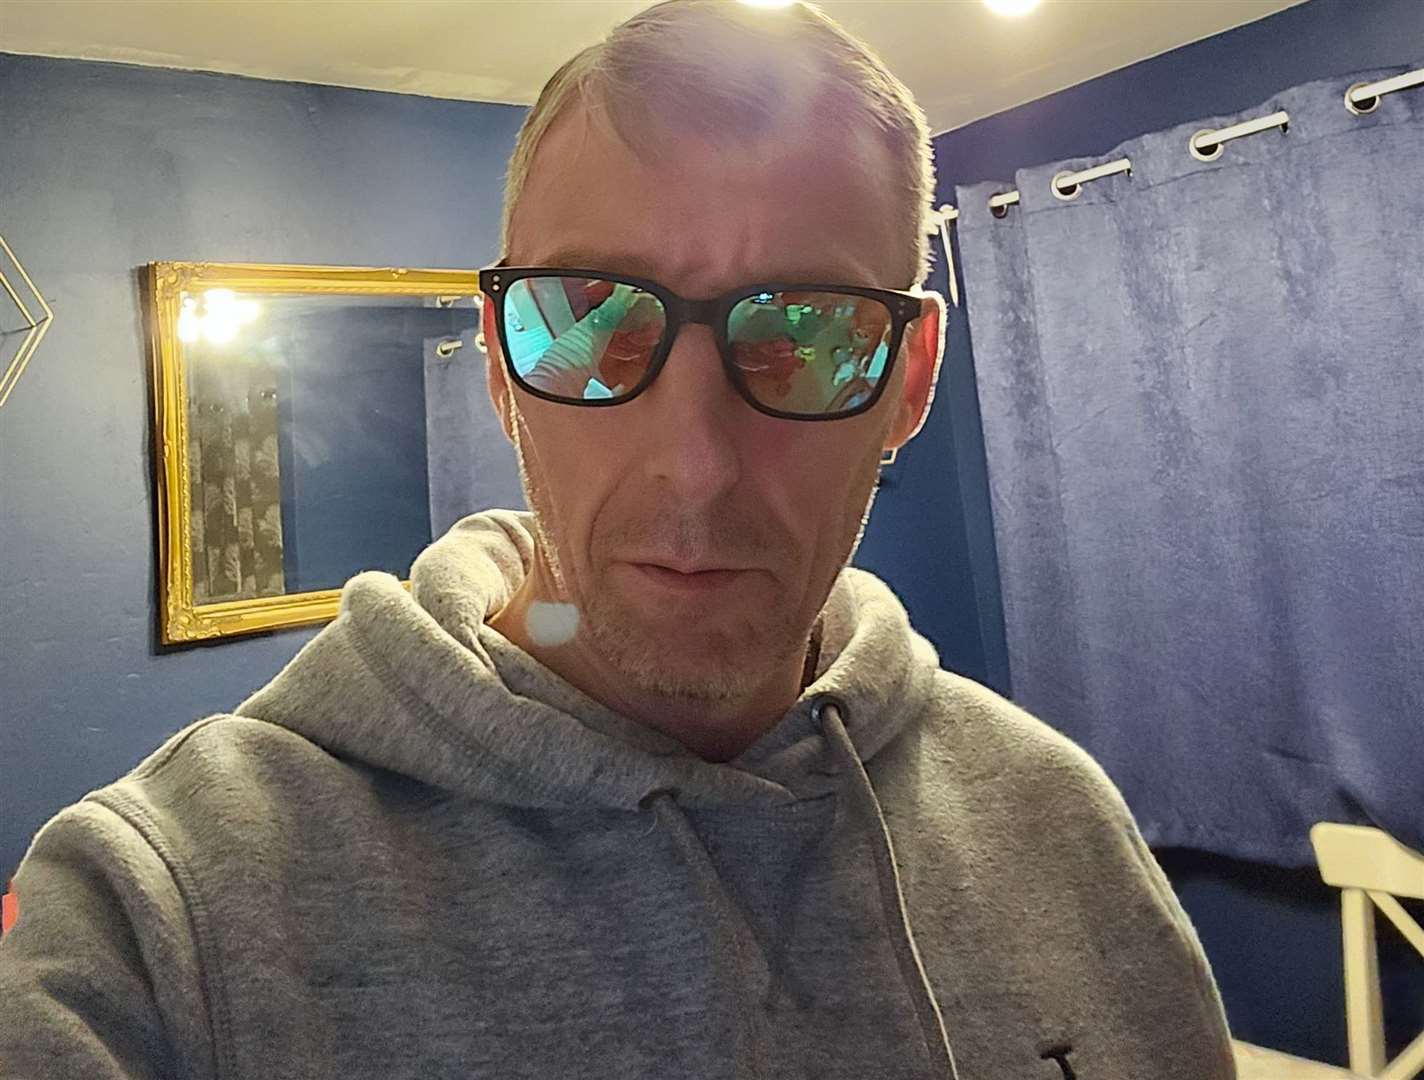 Steven Rymer, 52, says he was unfairly refused a job after being made to remove his corrective glasses during a colour blindness test